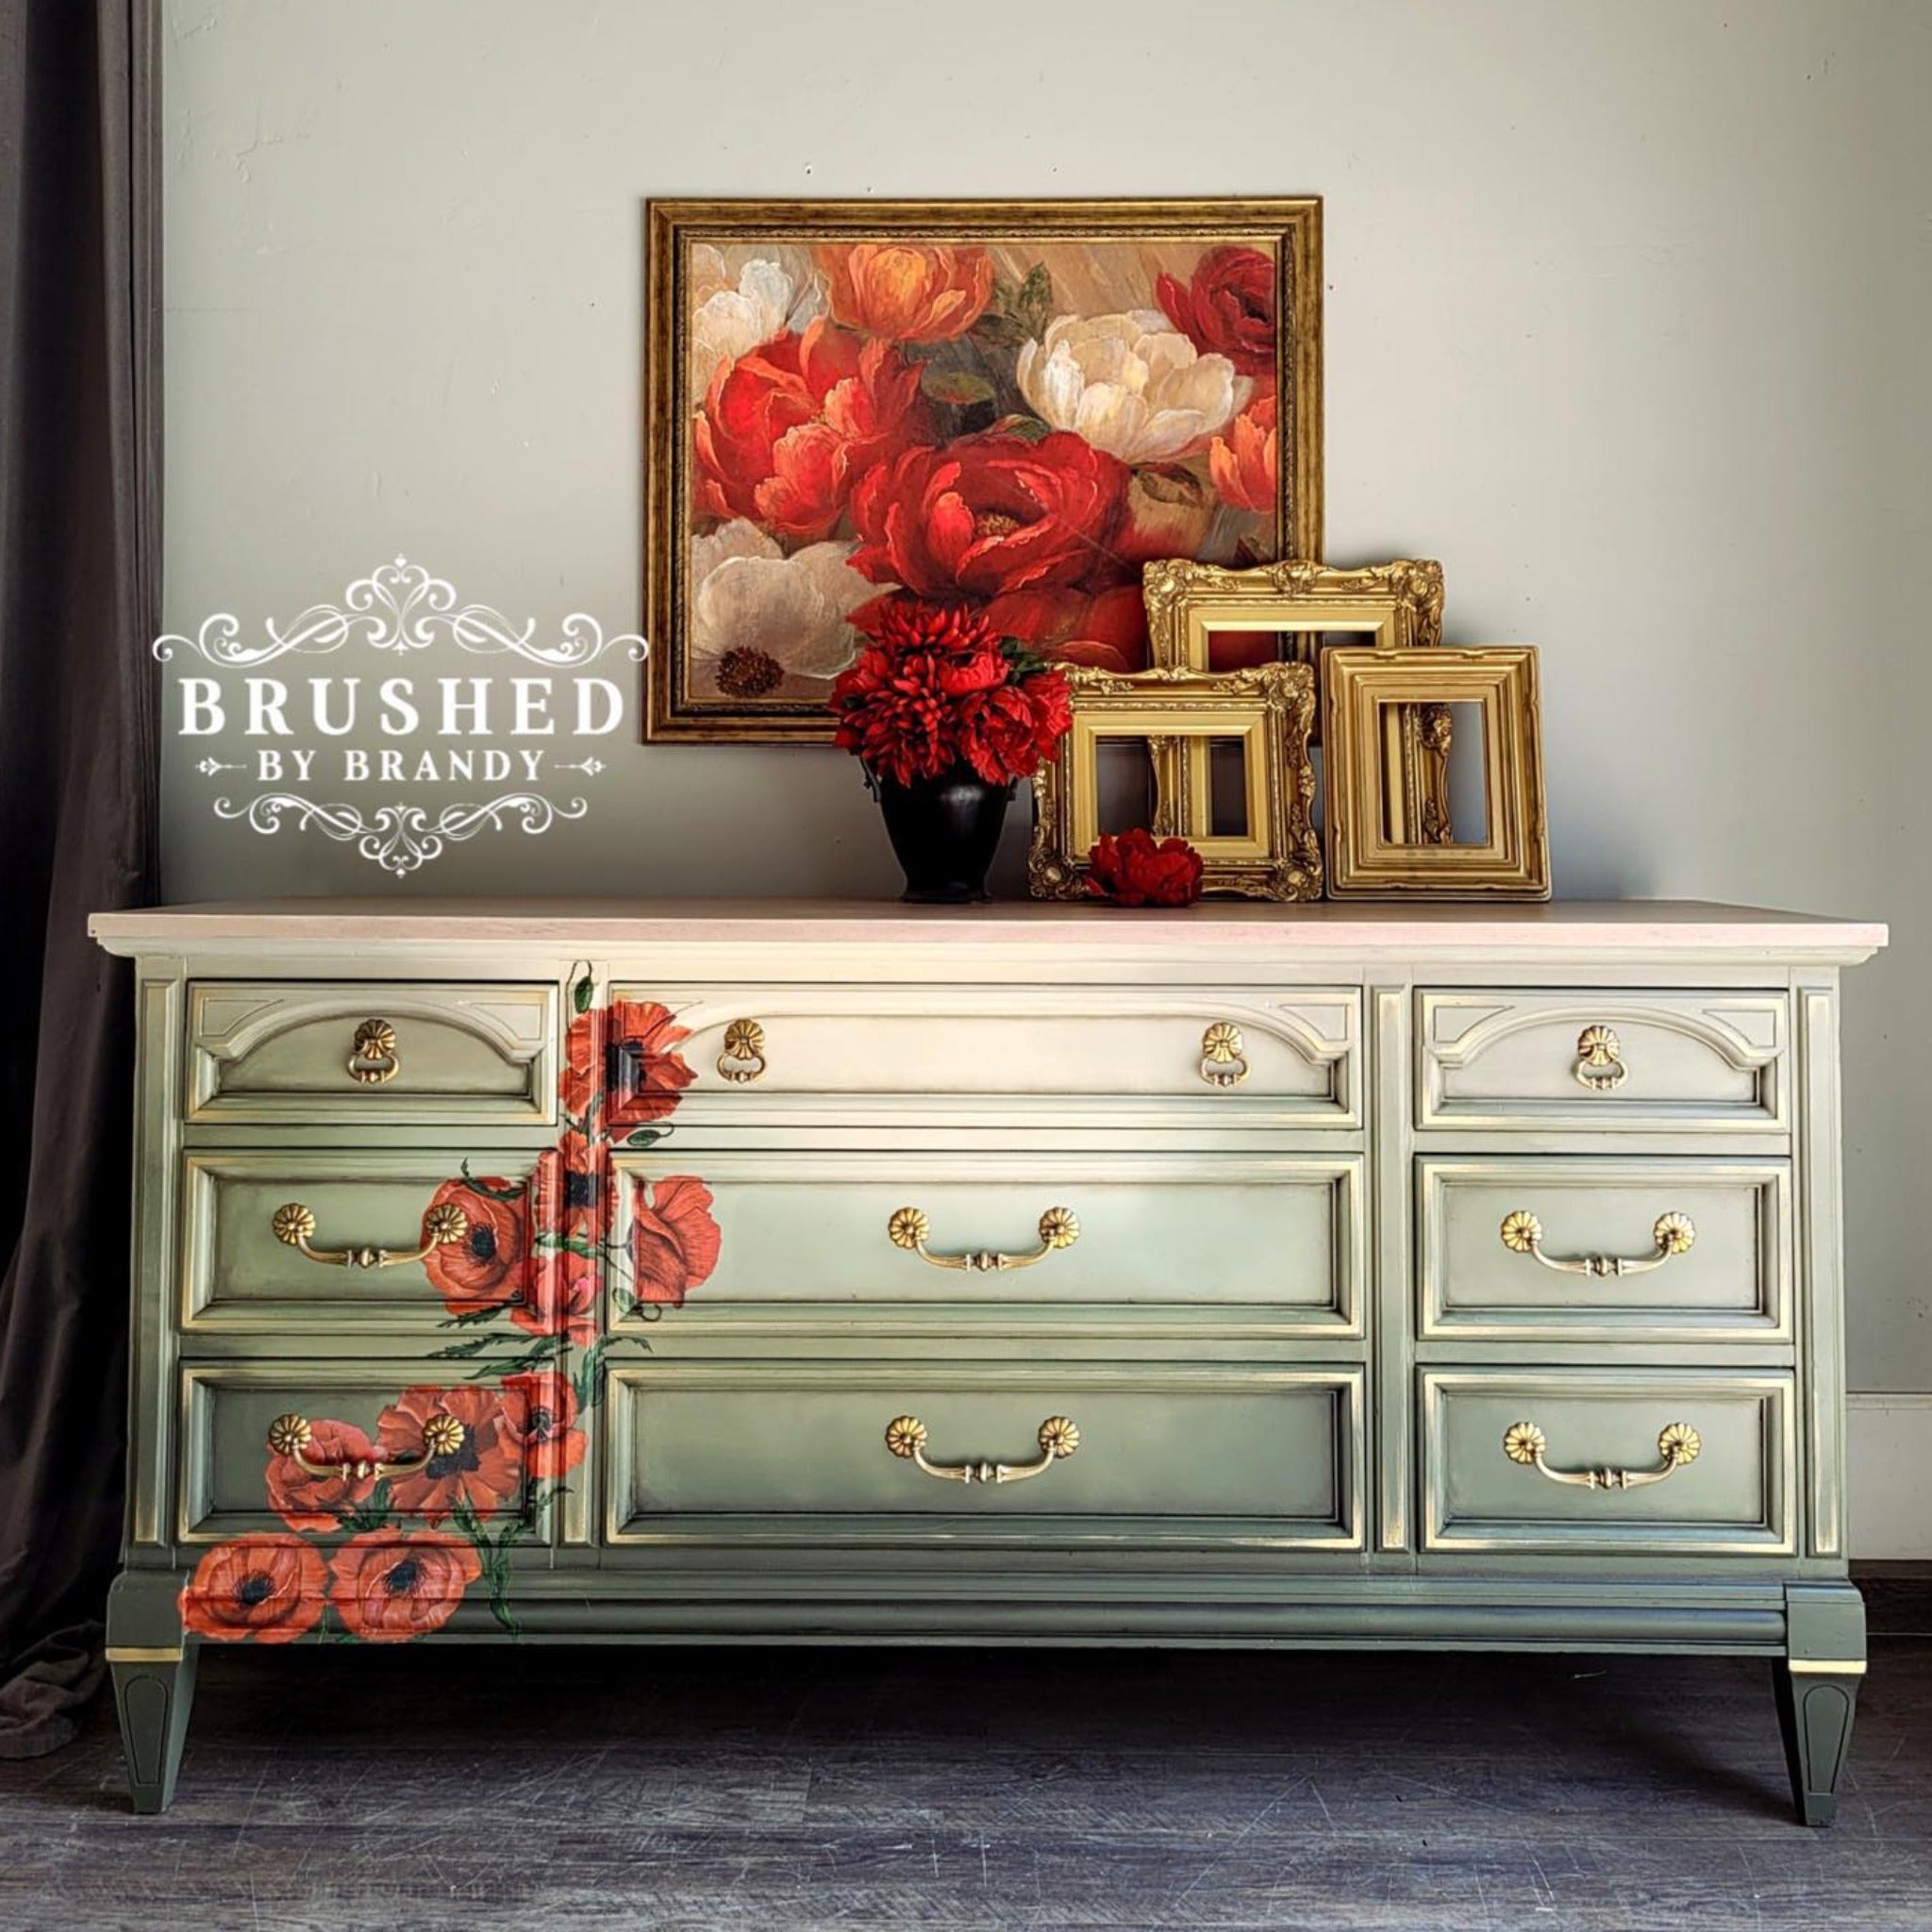 A large vintage dresser refurbished by Brushed by Brandy is painted an ombre of white down to dark green and features ReDesign with Prima's Poppy Gardens transfer on the left side drawers.